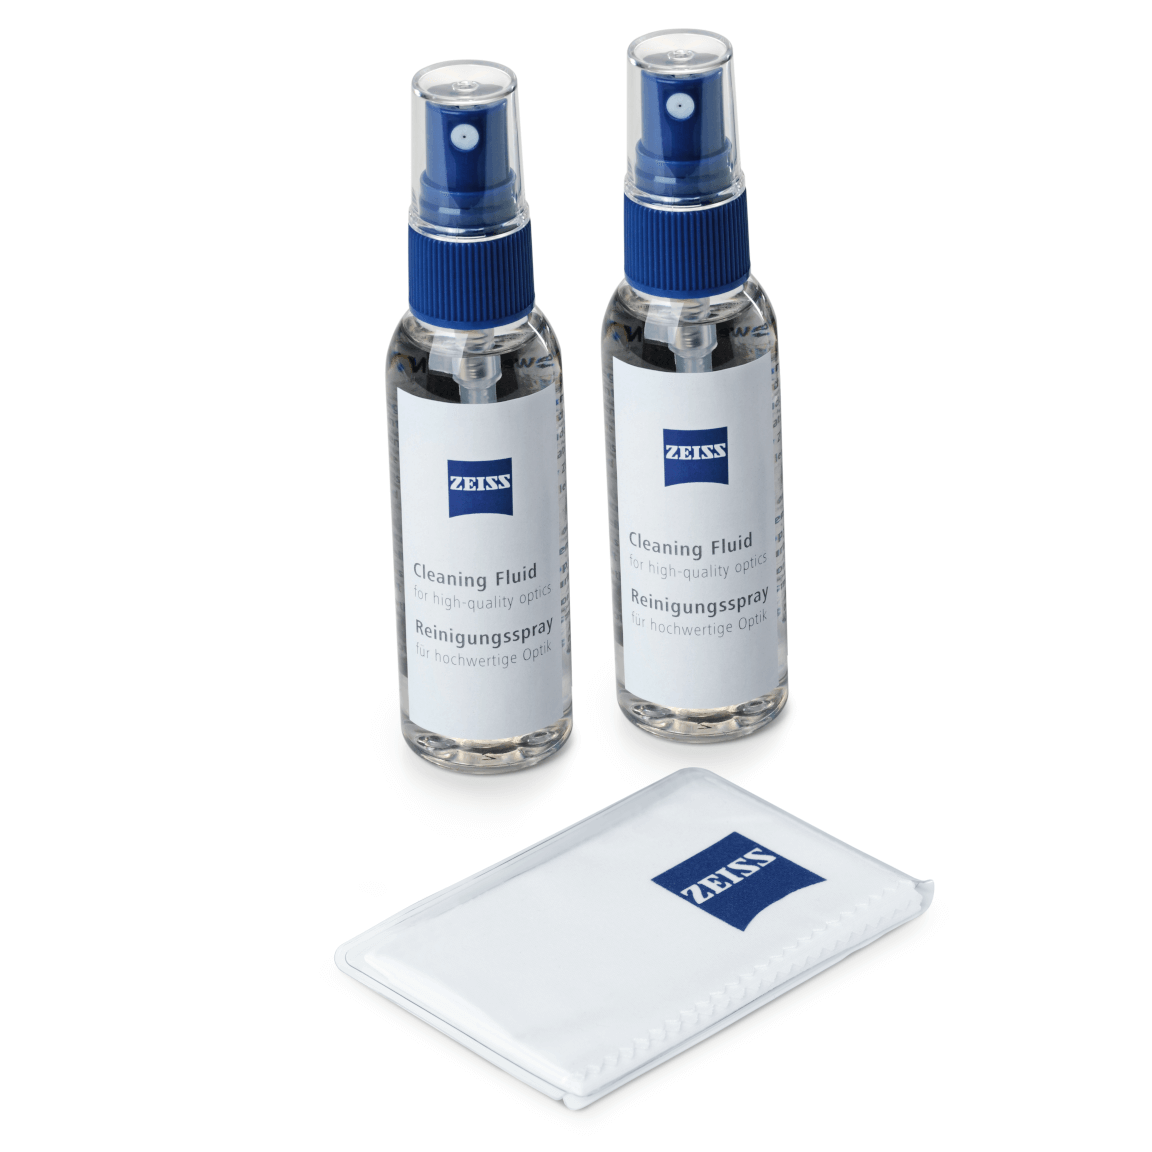 Cleaning spectacle lenses has never been easier, thanks to the specially-designed ZEISS Lens Spray and ZEISS Microfibre Cloth.